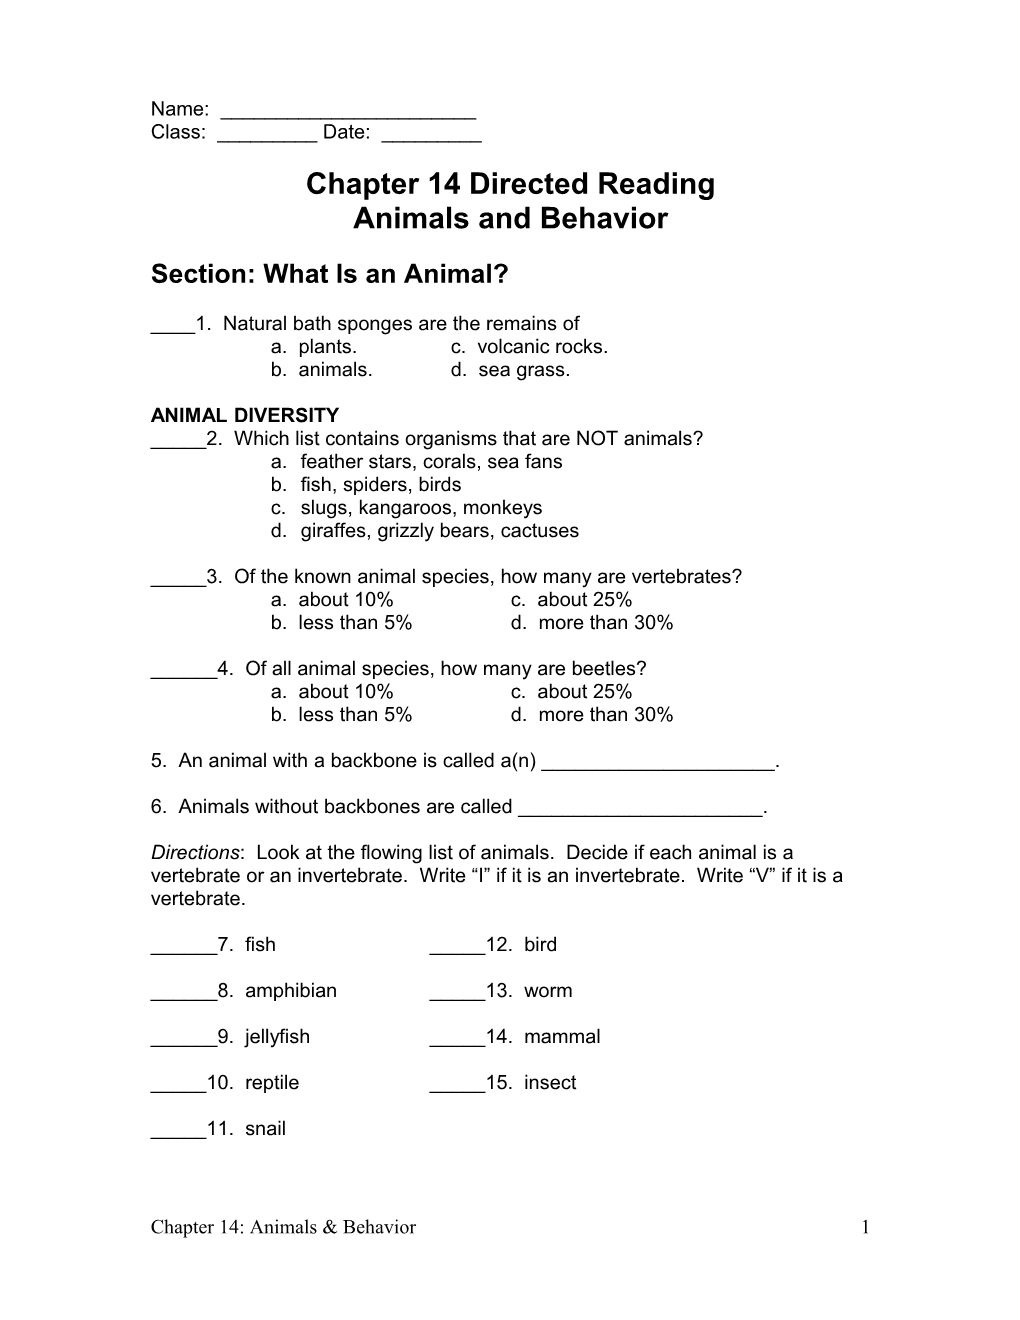 Chapter 14 Directed Reading